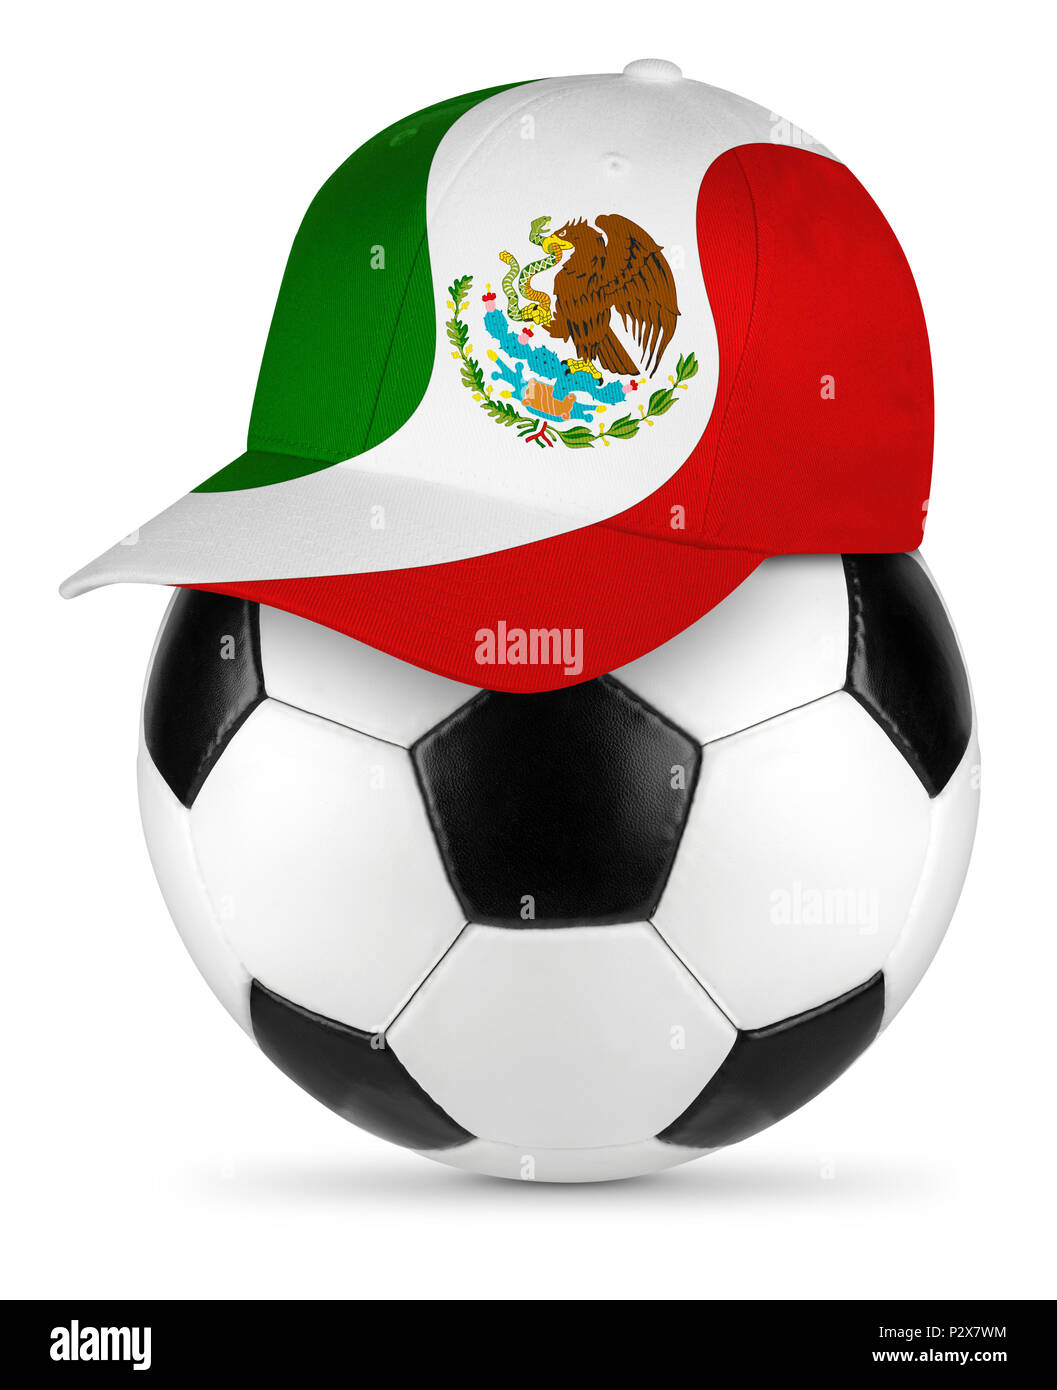 Classic black white leather soccer ball mexico mexican flag baseball fan cap isolated background sport football concept Stock Photo